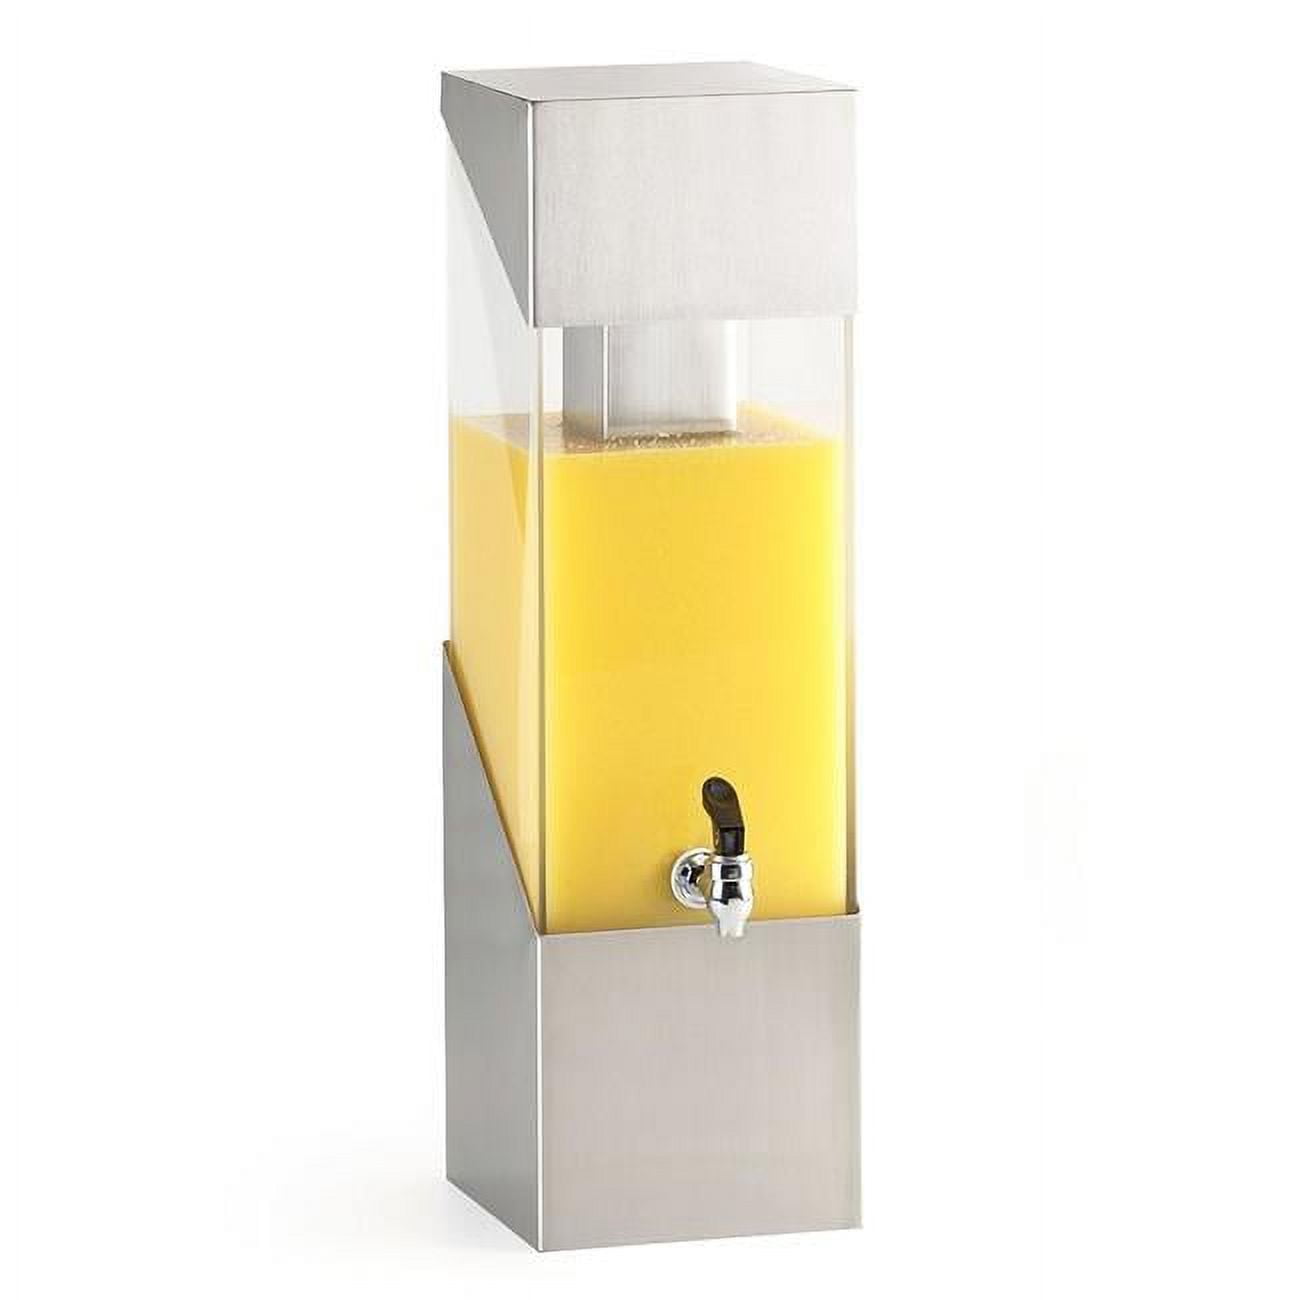 1991-3-55 3 Gal Stainless Steel Beverage Dispenser With Ice Chamber, Square - 7.25 X 9.5 X 24.5 In.